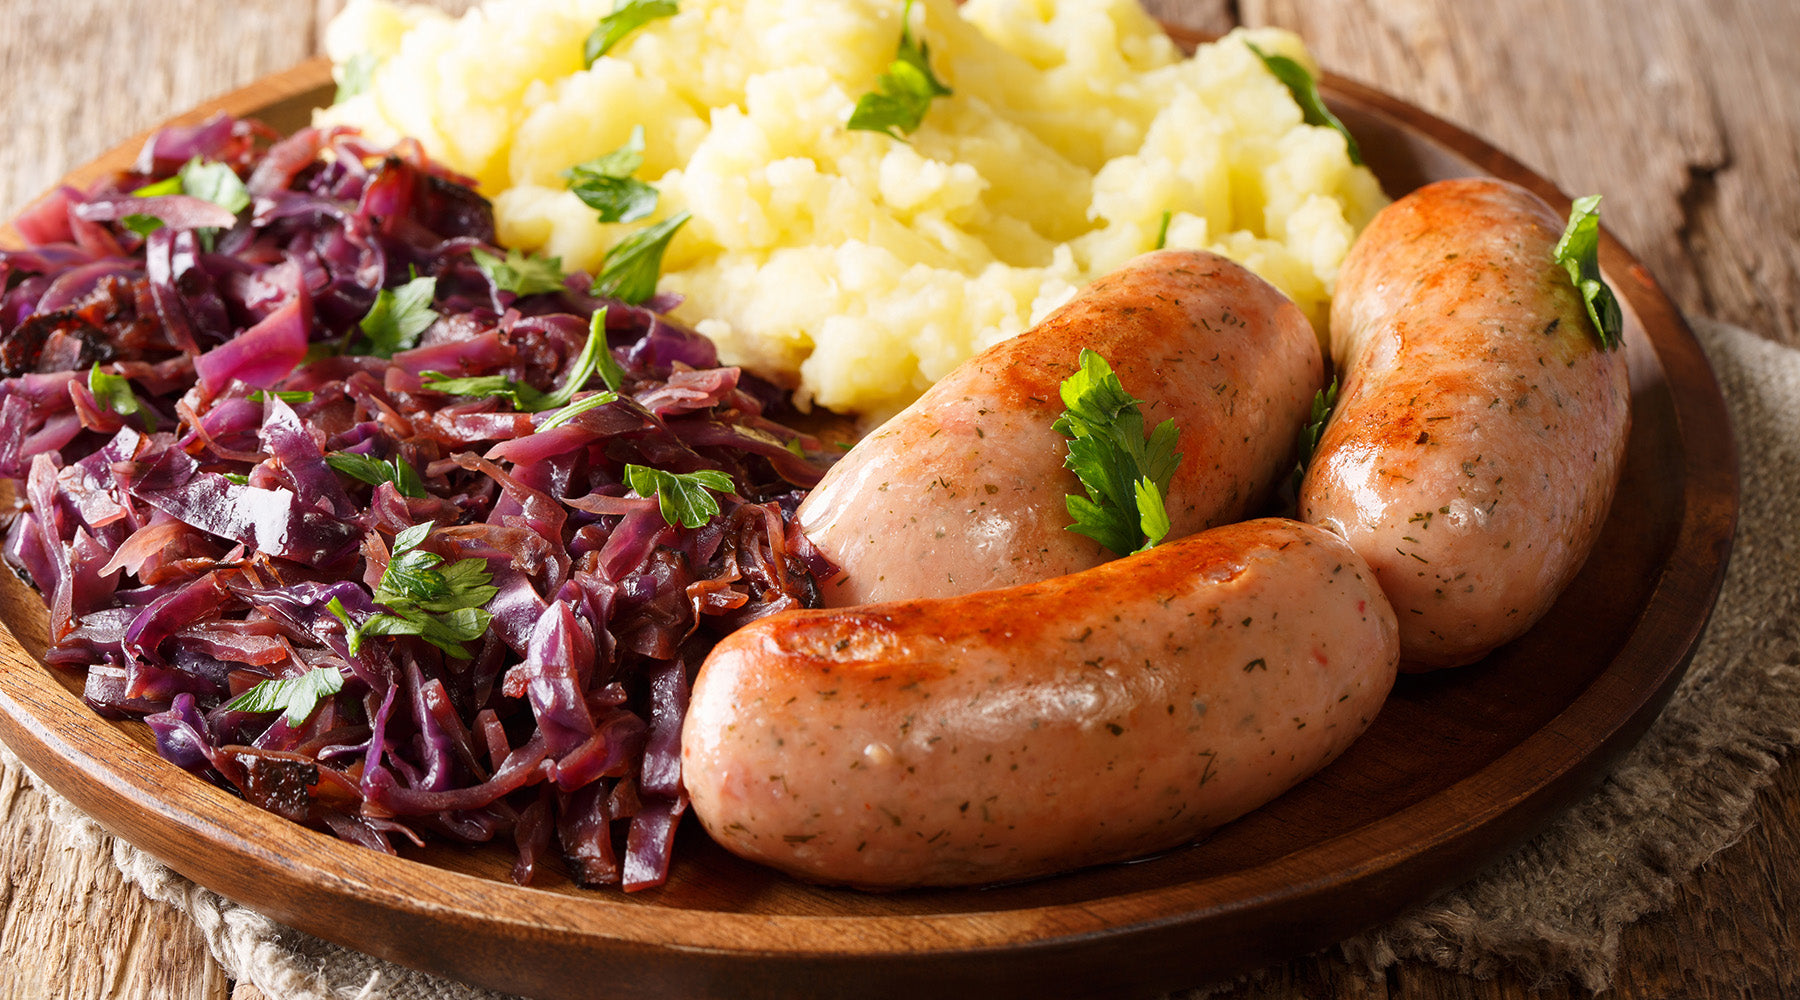 Bavarian red cabbage on a wood plate with sausage